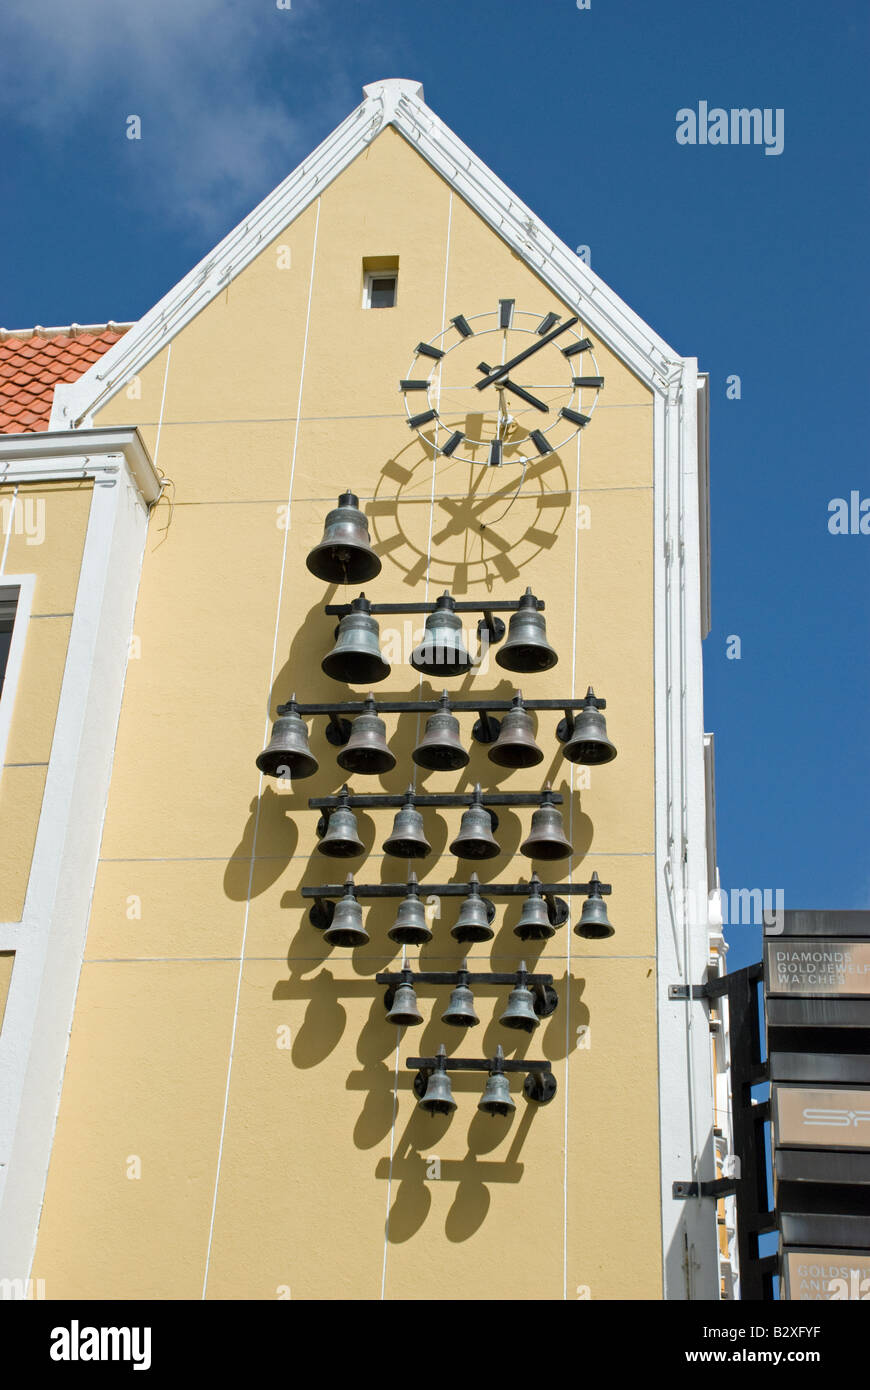 Wall clock with chiming bells. Willemstad, Curacao, Netherlands Antilles. Stock Photo